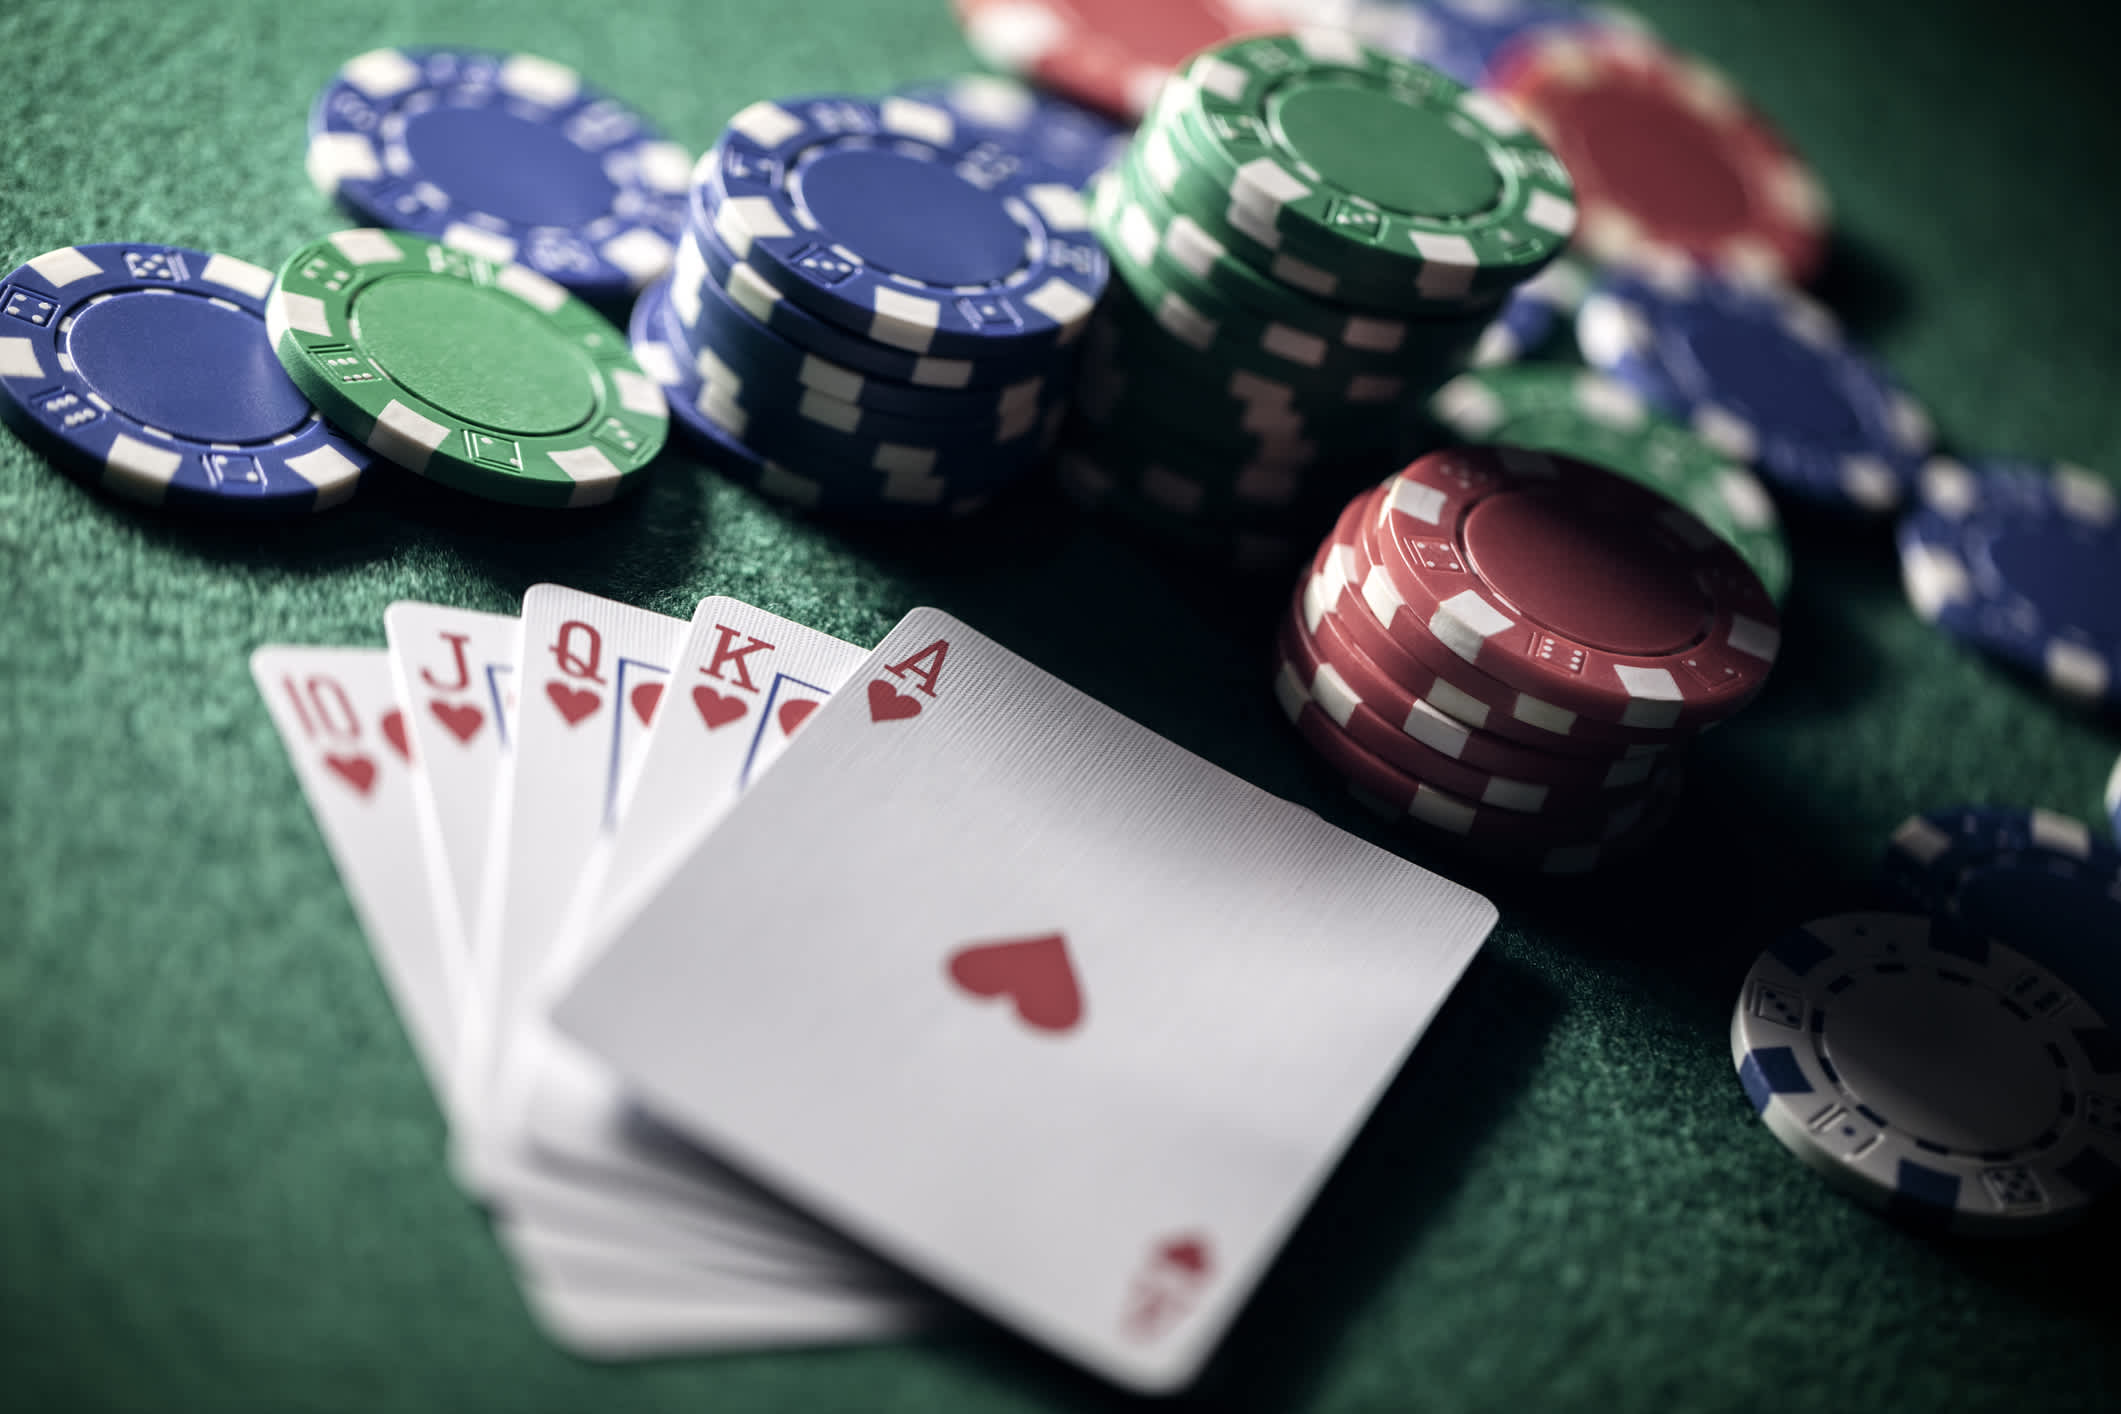 Poker Games: Become A Successful Online Poker Player With These Traits